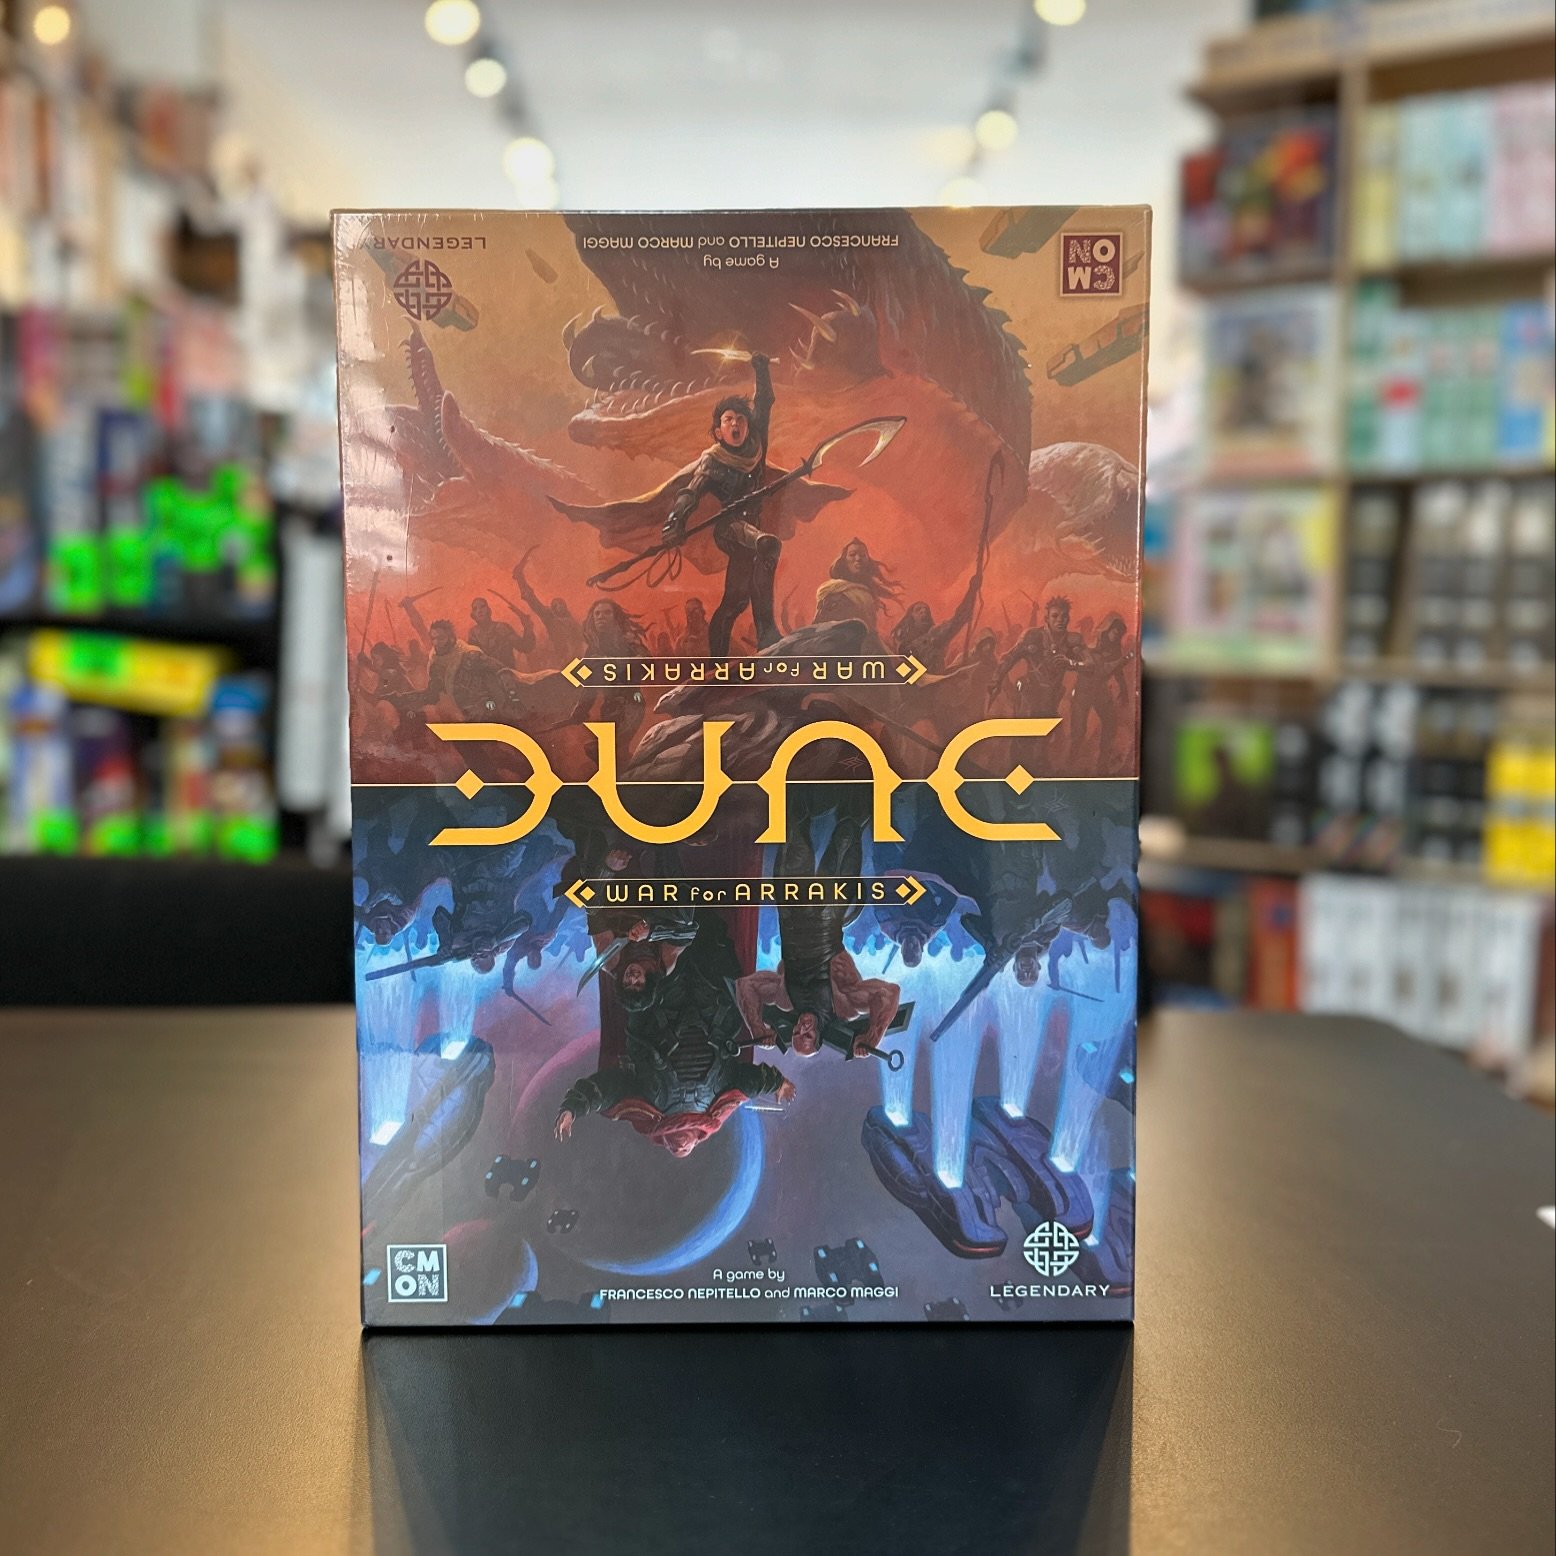 May thy knife chip and shatter ⚒️ Arrakis holds the most important resource in the galaxy, Spice.  Will House Atreides or House Harkonnen emerge victorious in this asymmetrical strategy game?  Replay the #dune saga differently with the each play thro